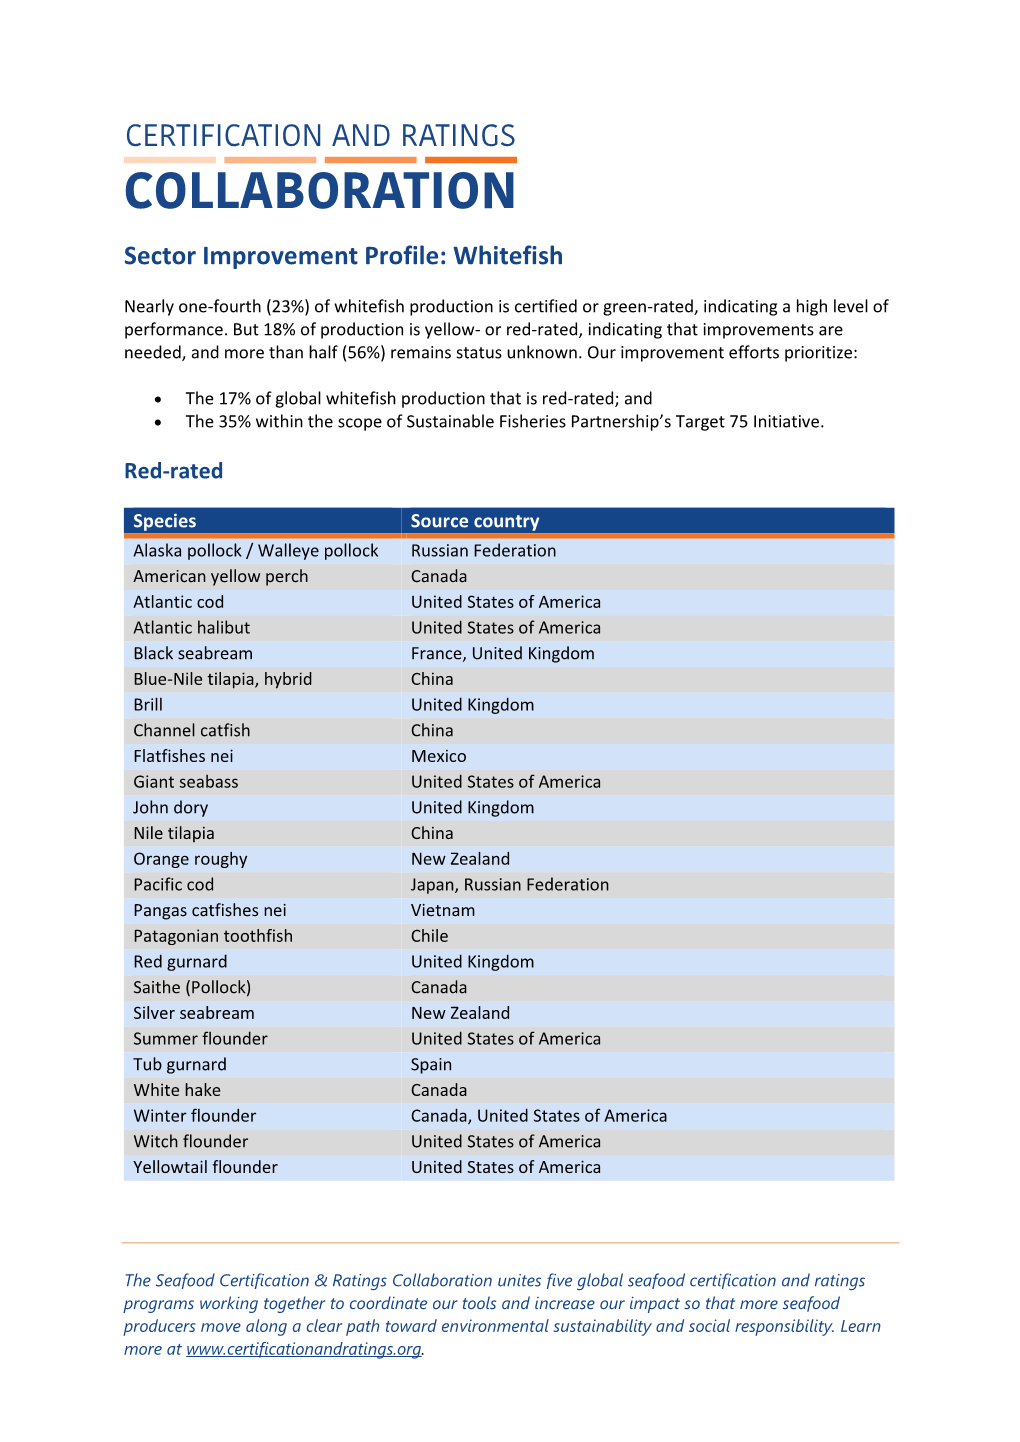 Sector Improvement Profile: Whitefish